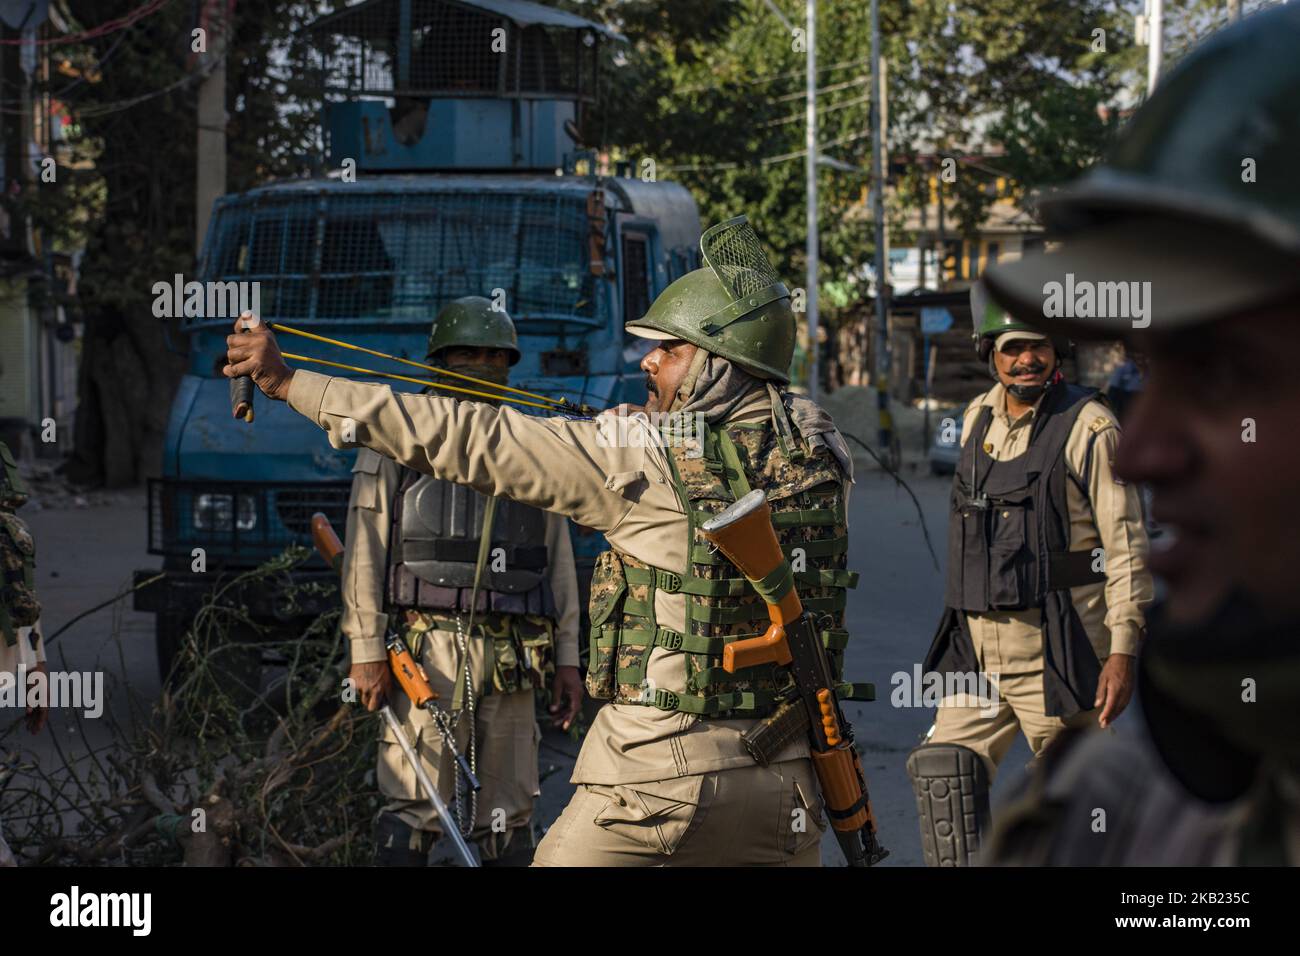 An Indian paramilitary trooper shoots stones with his catapult at Kashmiri Muslim protesters during a protest against the killing of a Kashmiri rebel commander on October 12, 2018 in Srinagar, the summer capital of Indian administered Kashmir, India.Kashmiri youth clashed with Indian government forces who were deployed in strength in different parts of Srinagar on Friday to prevent protests against the killing of a Kashmiri rebel commander in Kupwara district of Indian-administered Kashmir the previous day. Manan Wani, who had quit his doctorate in Geology at an Indian university to join the H Stock Photo